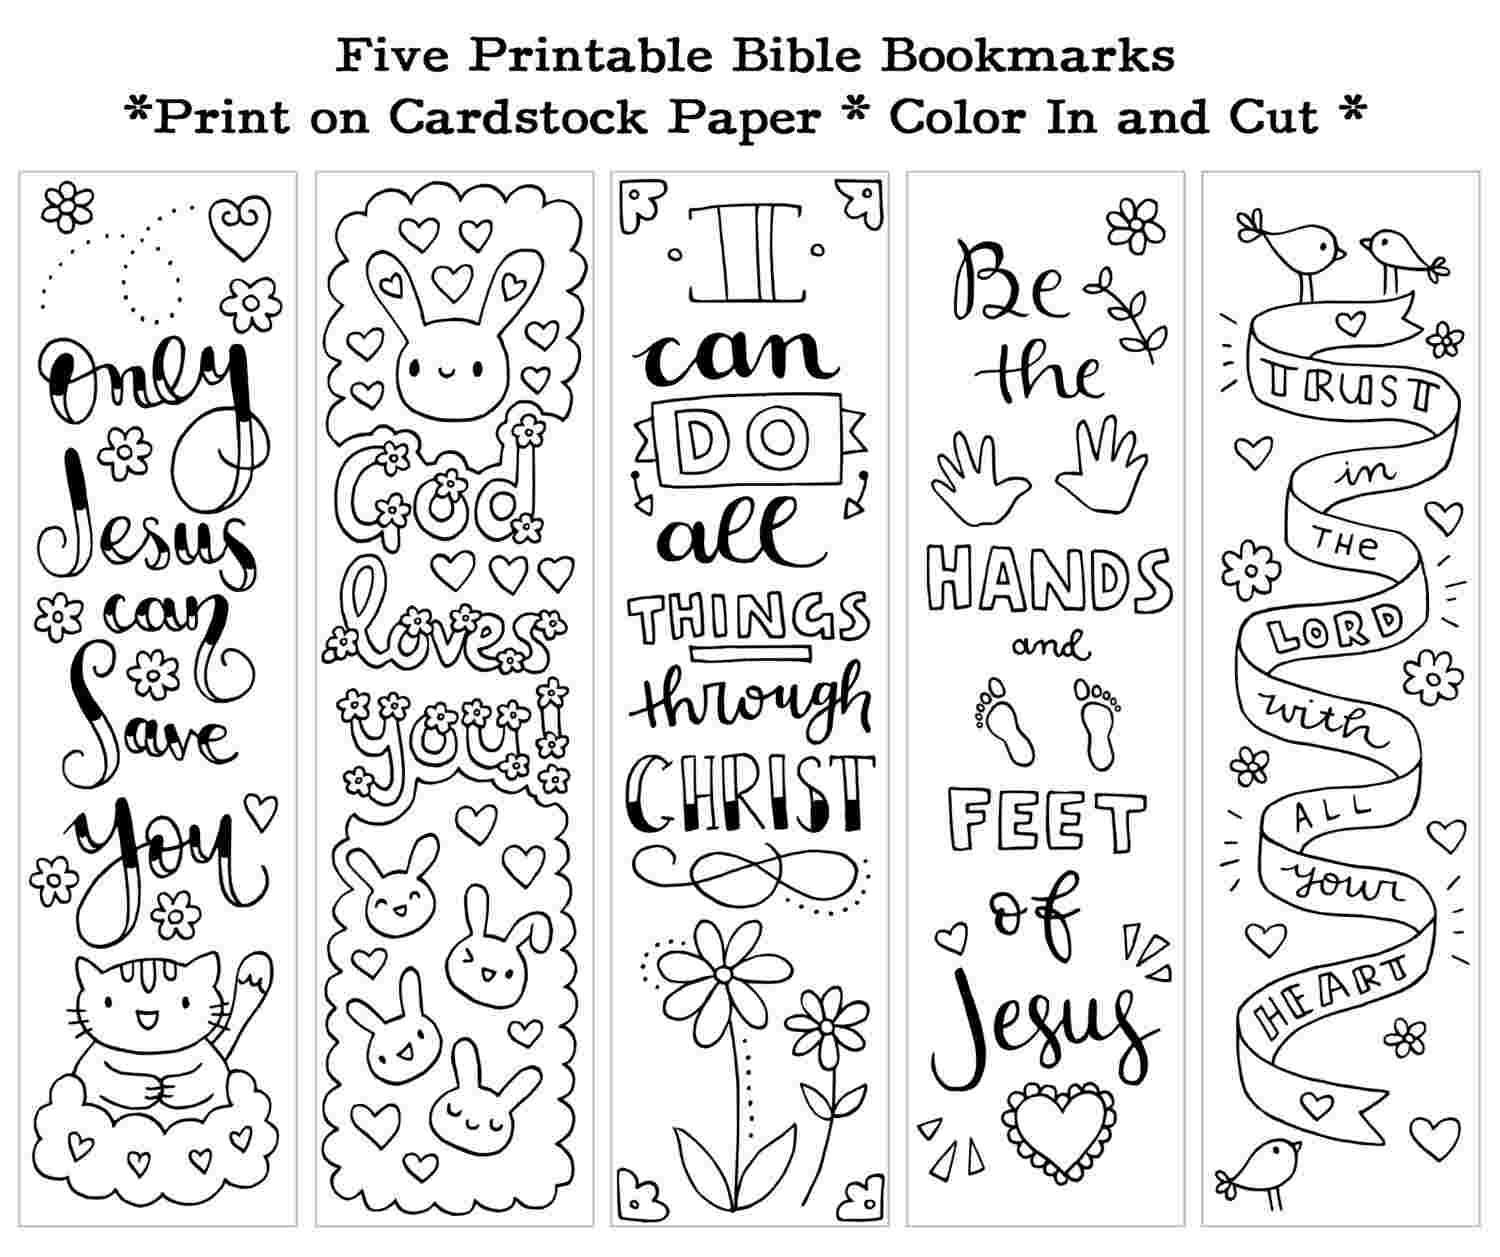 Coloring Pages : Free Printable Coloring Bookmarks Templates Intended For Free Blank Bookmark Templates To Print